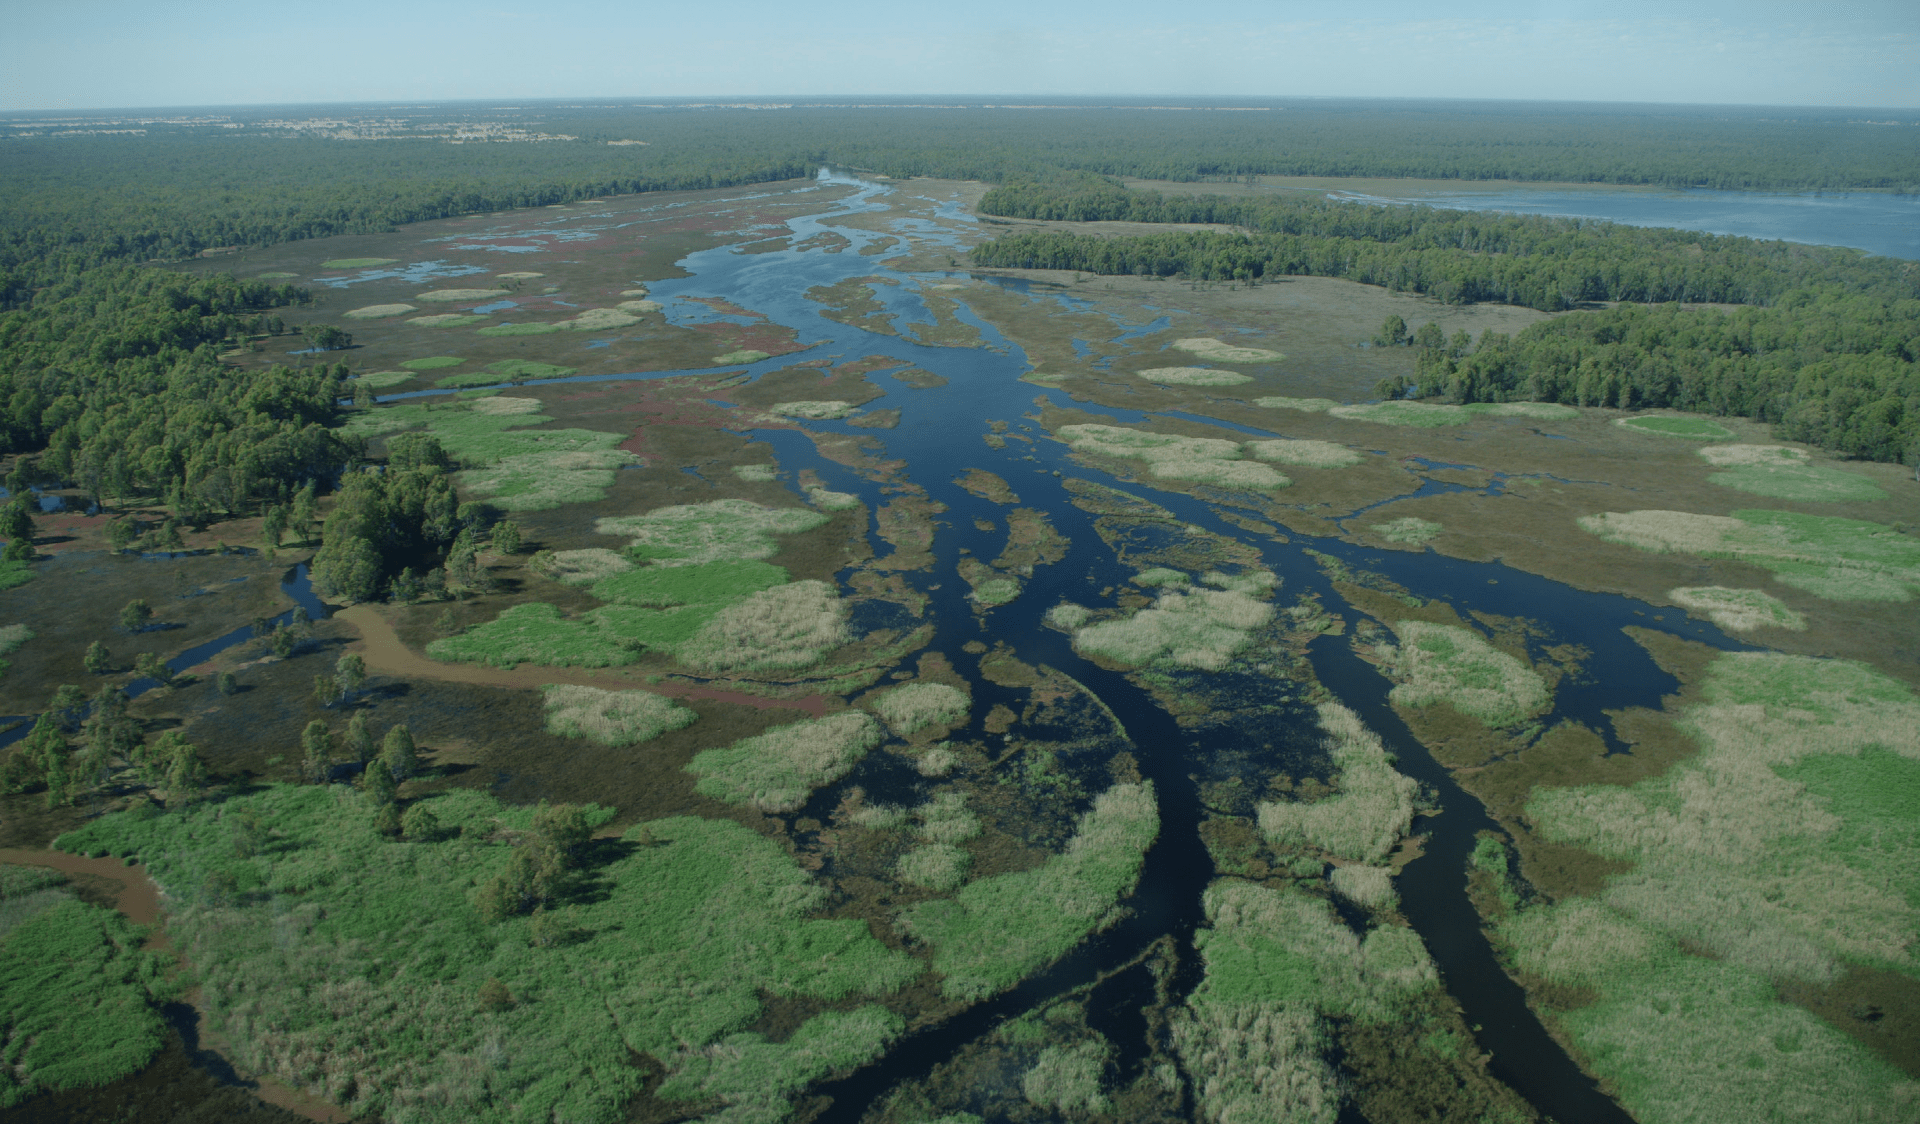 Aerial view of the Barmah wetlands system